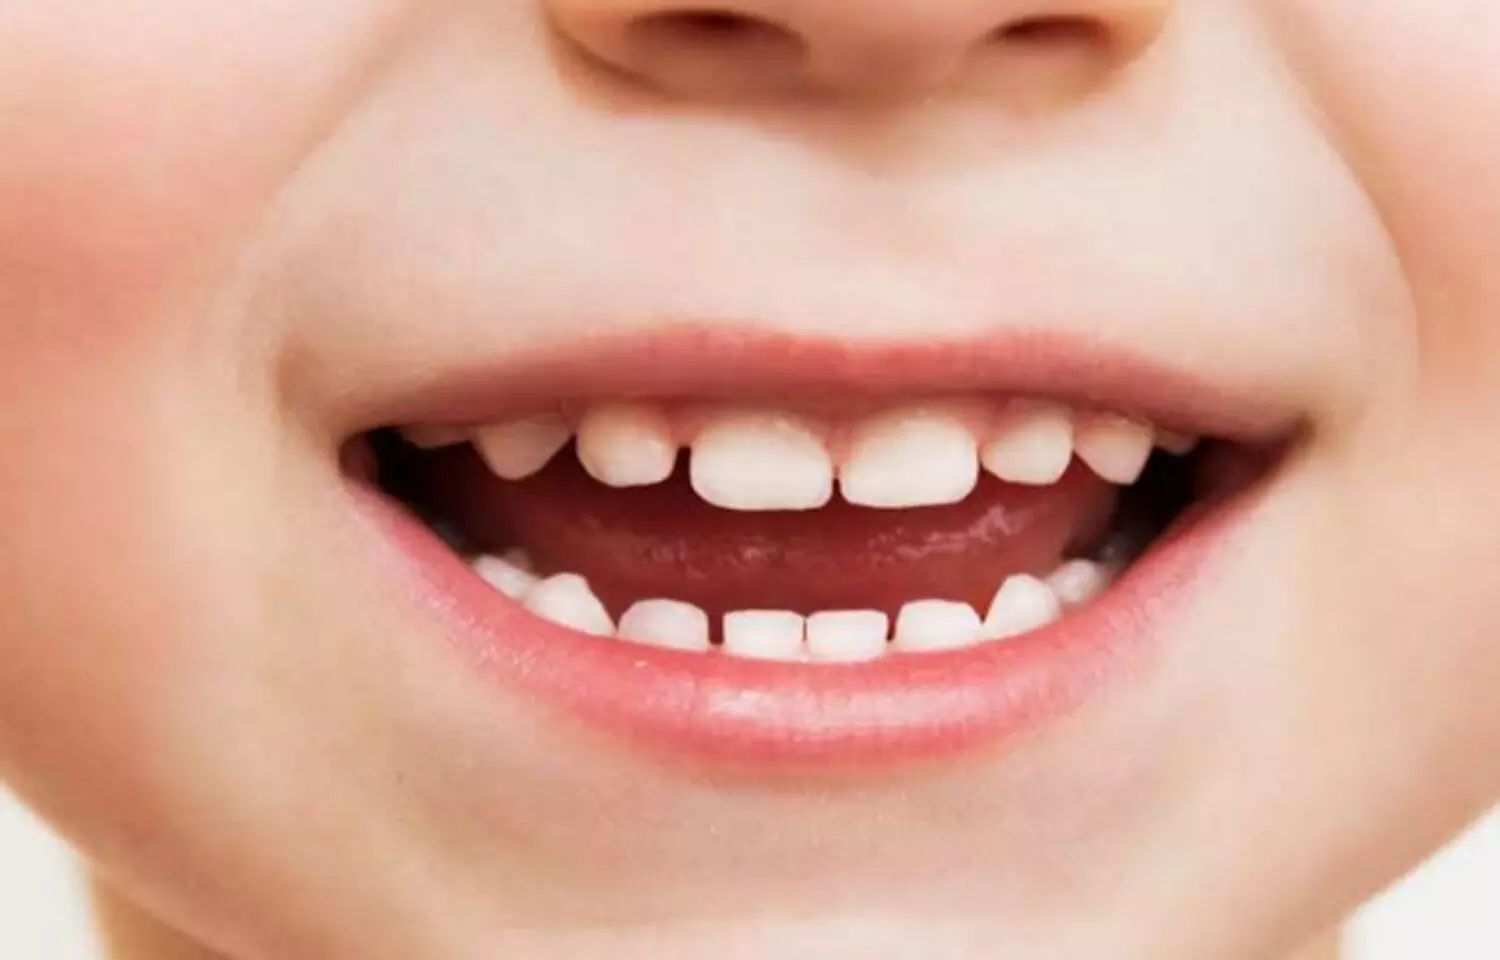 Socioeconomic inequalities tied to severity of dental caries in primary dentition